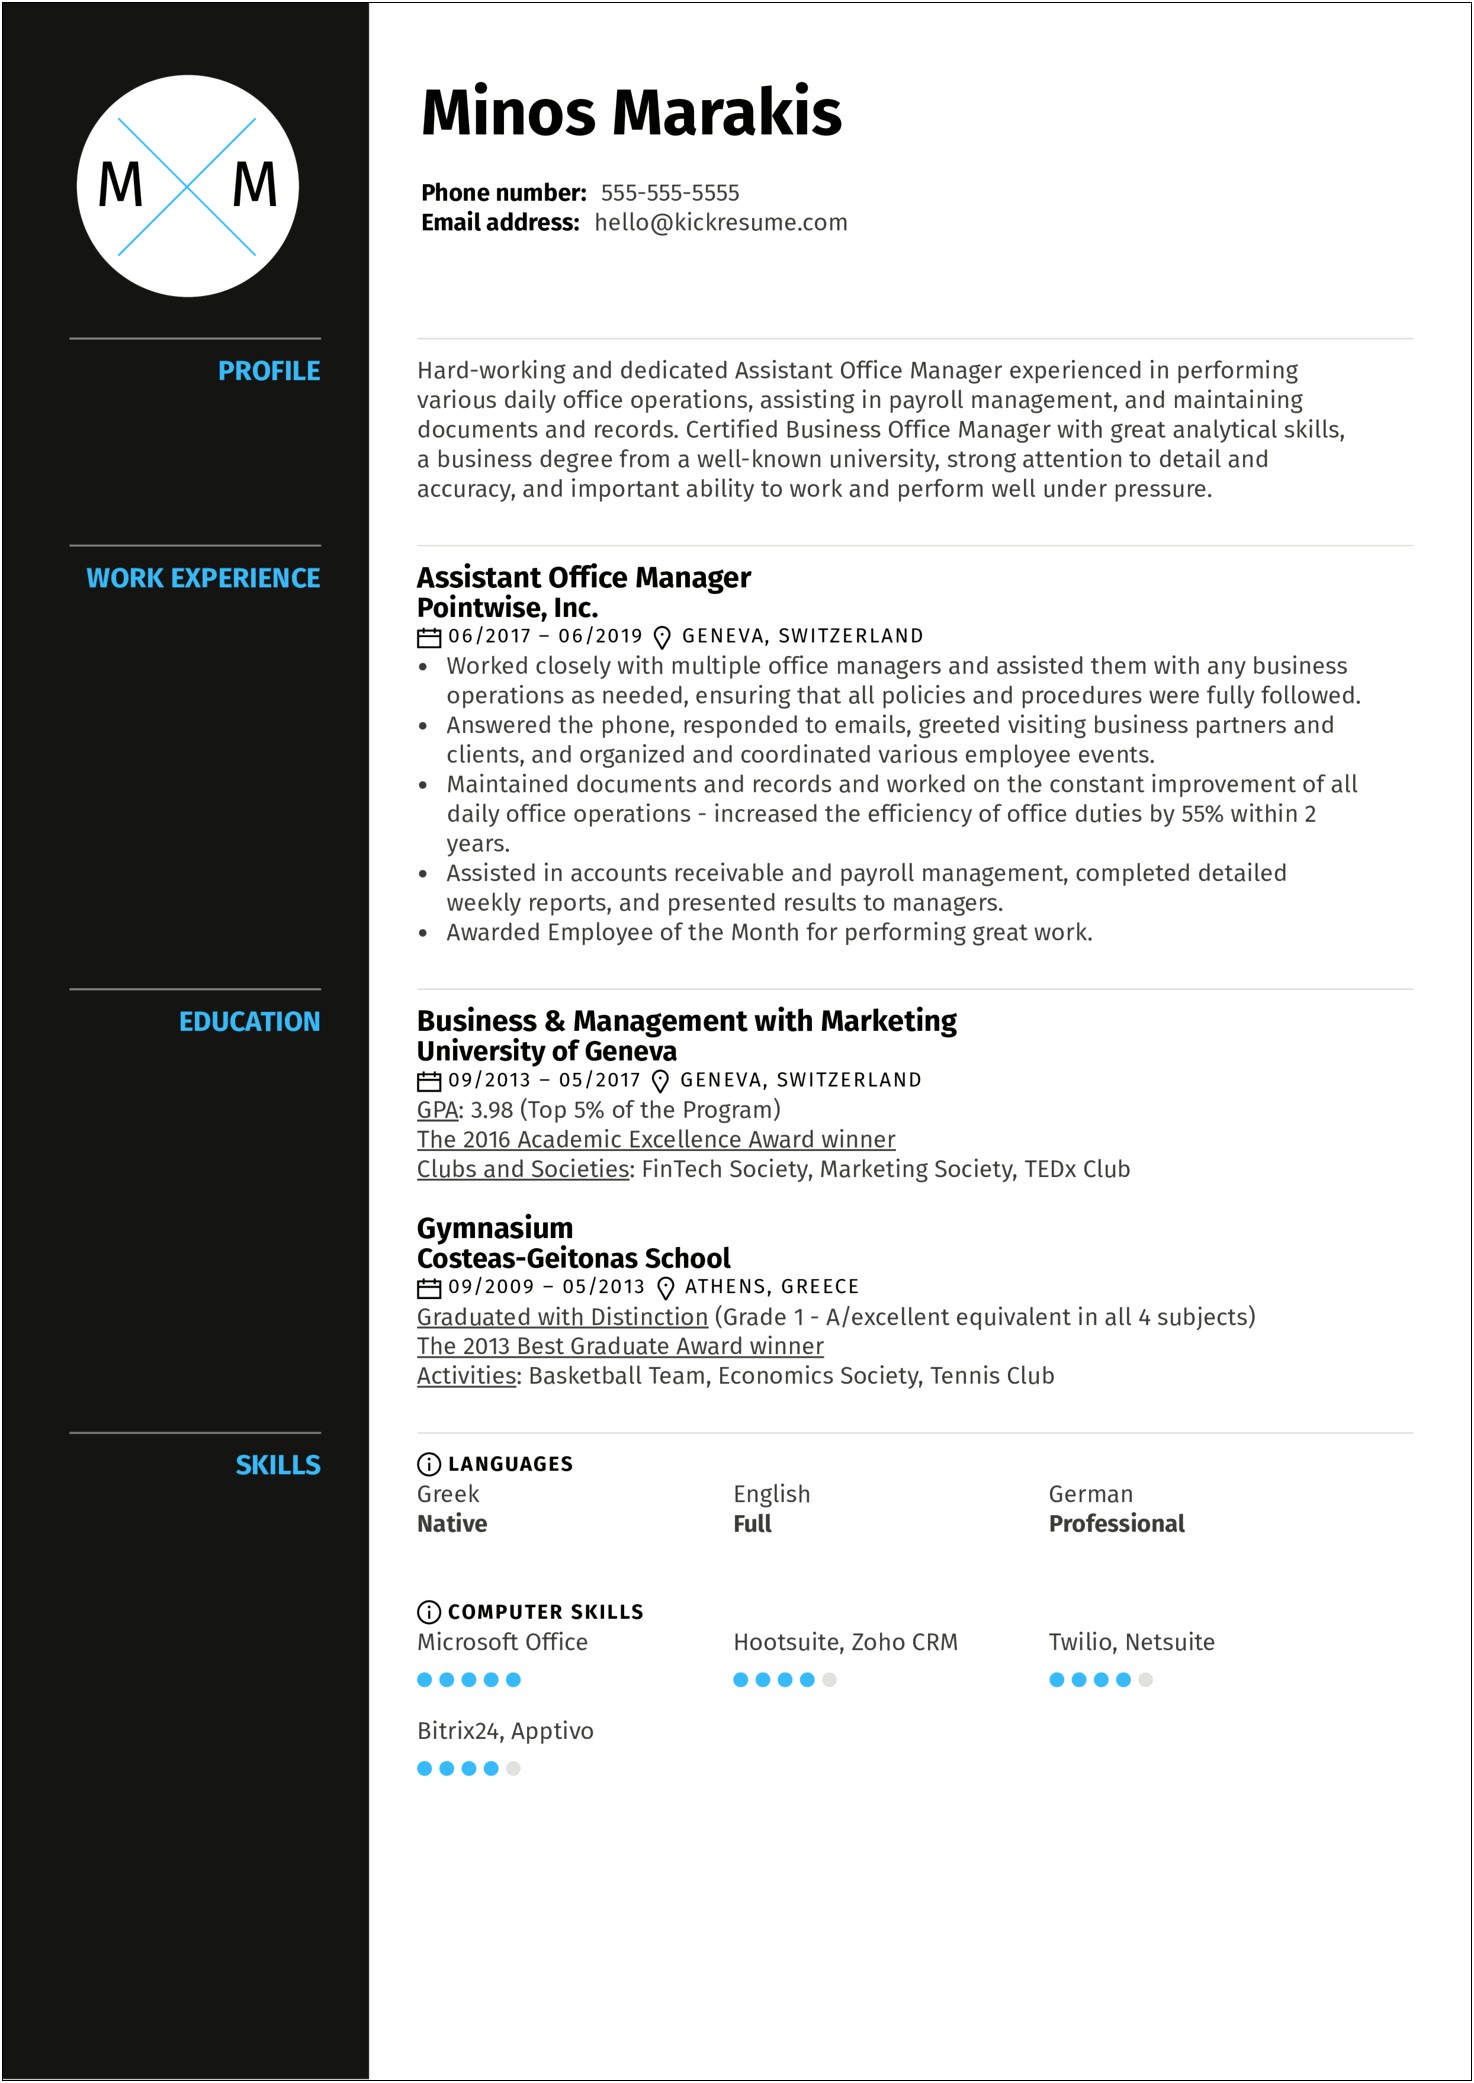 Job Description Of An Office Manager For Resume